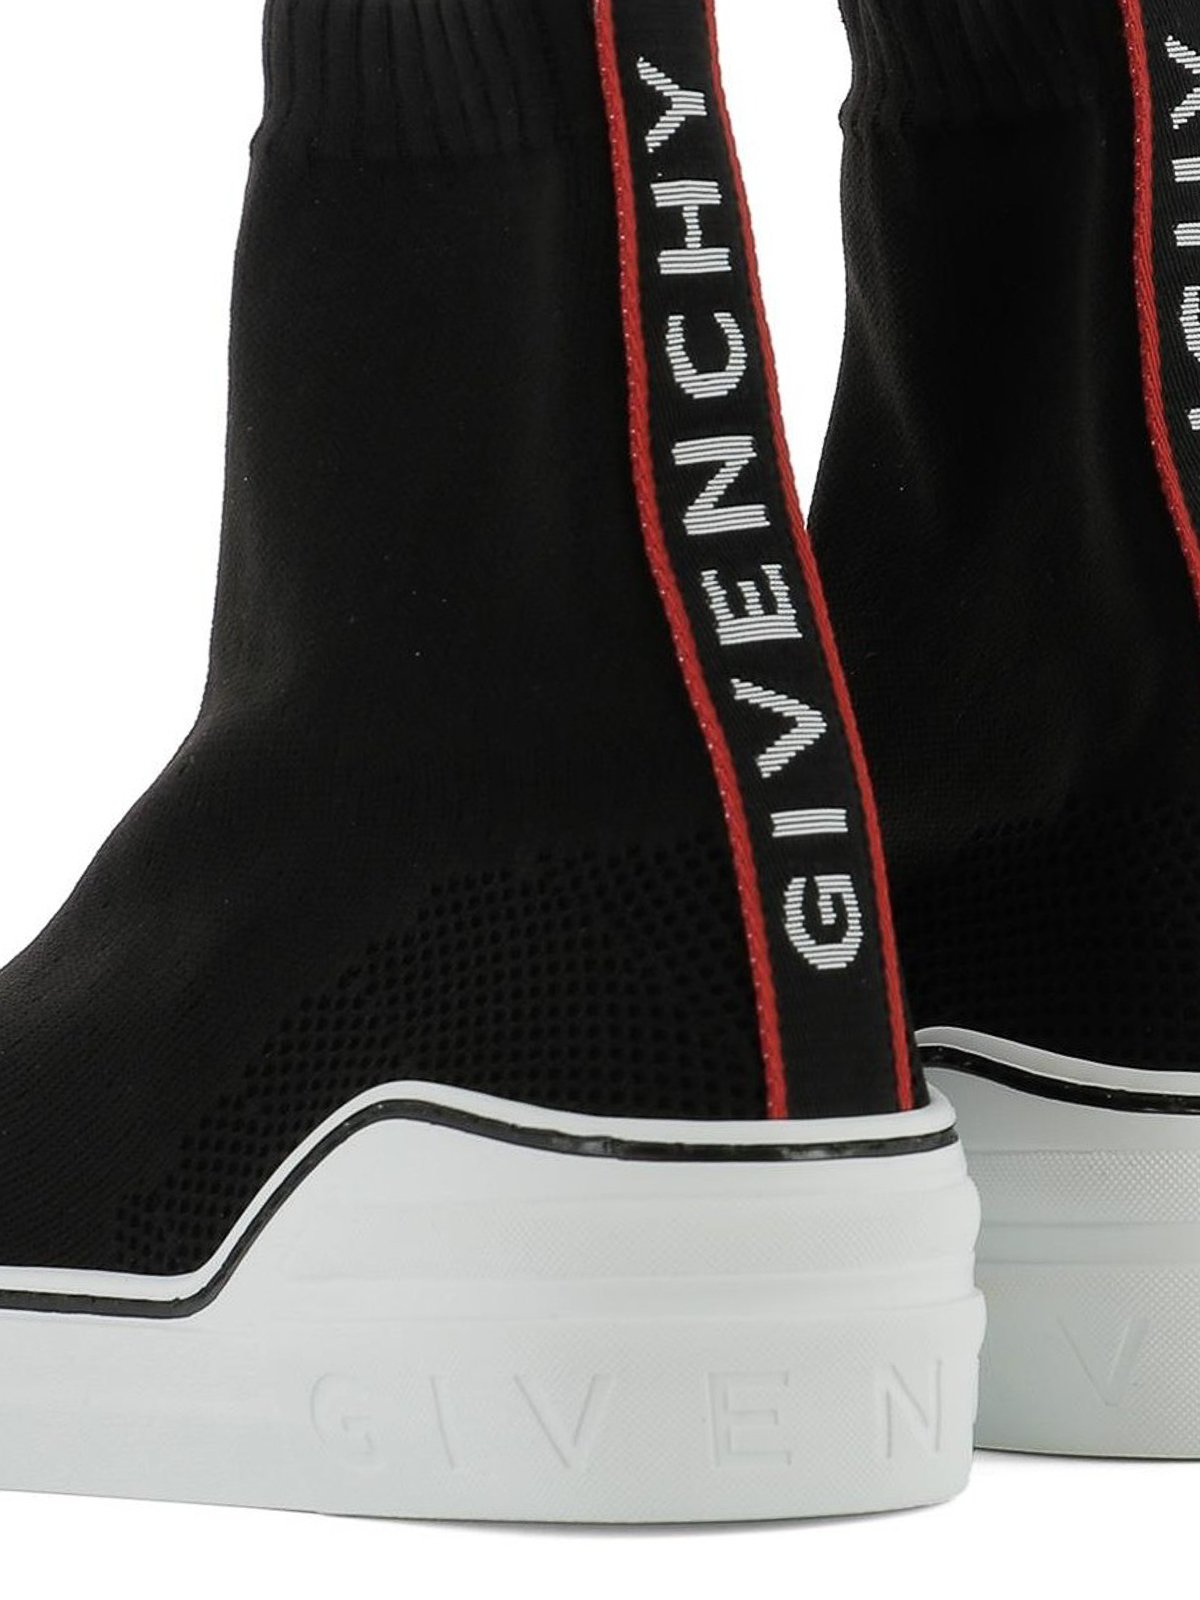 givenchy alte